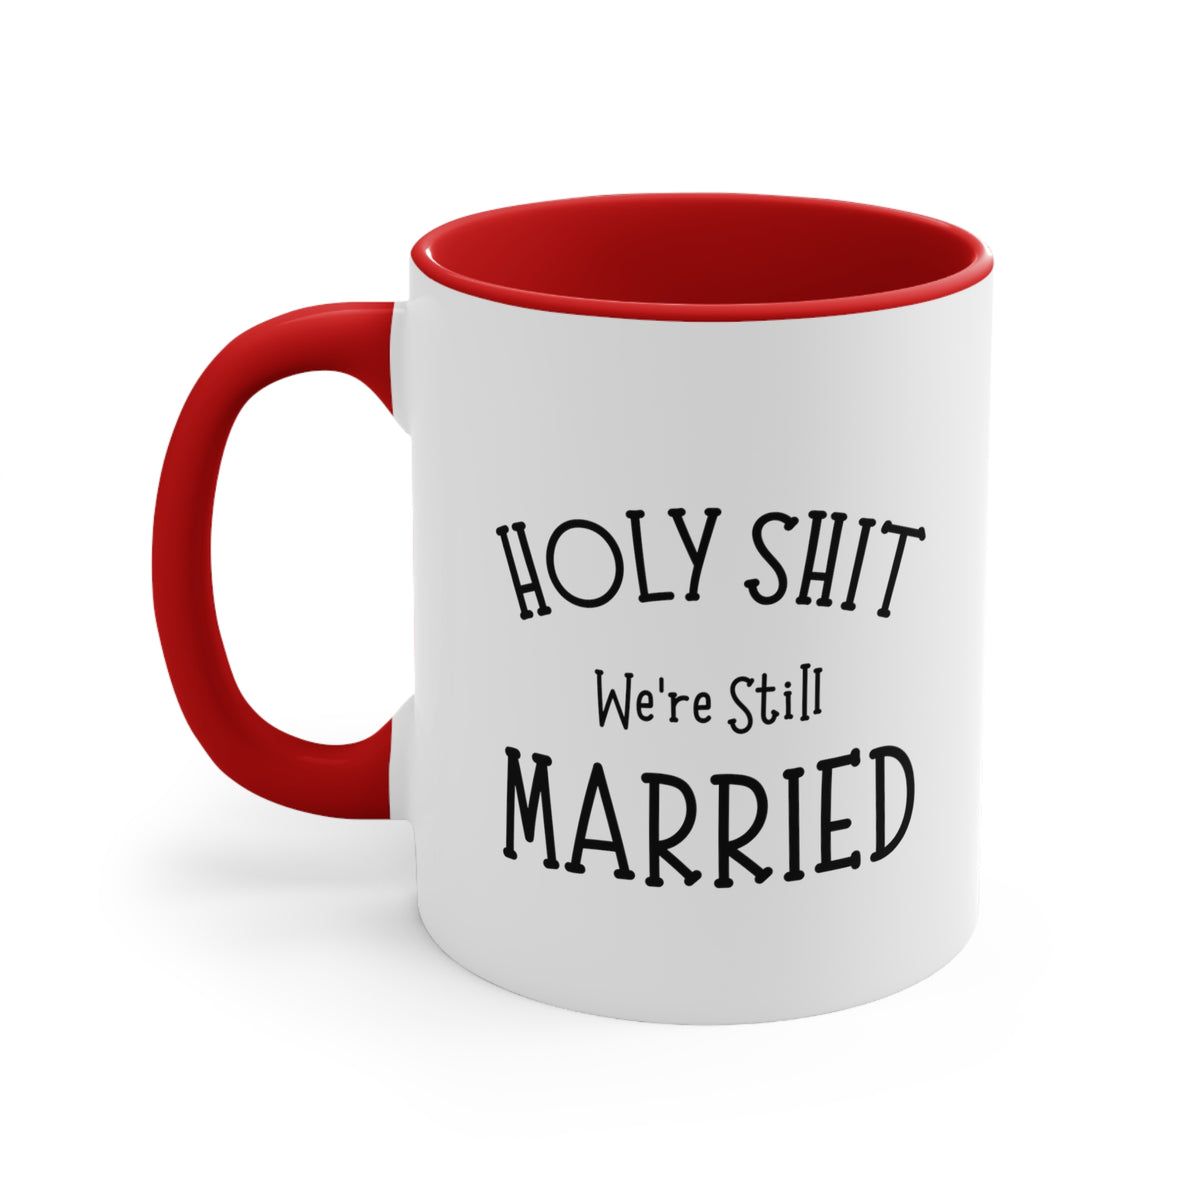 Valentins Day Mug, Holy Shit We're Still Married, Funny For Him Her, Coffee Cup For Wife Husband